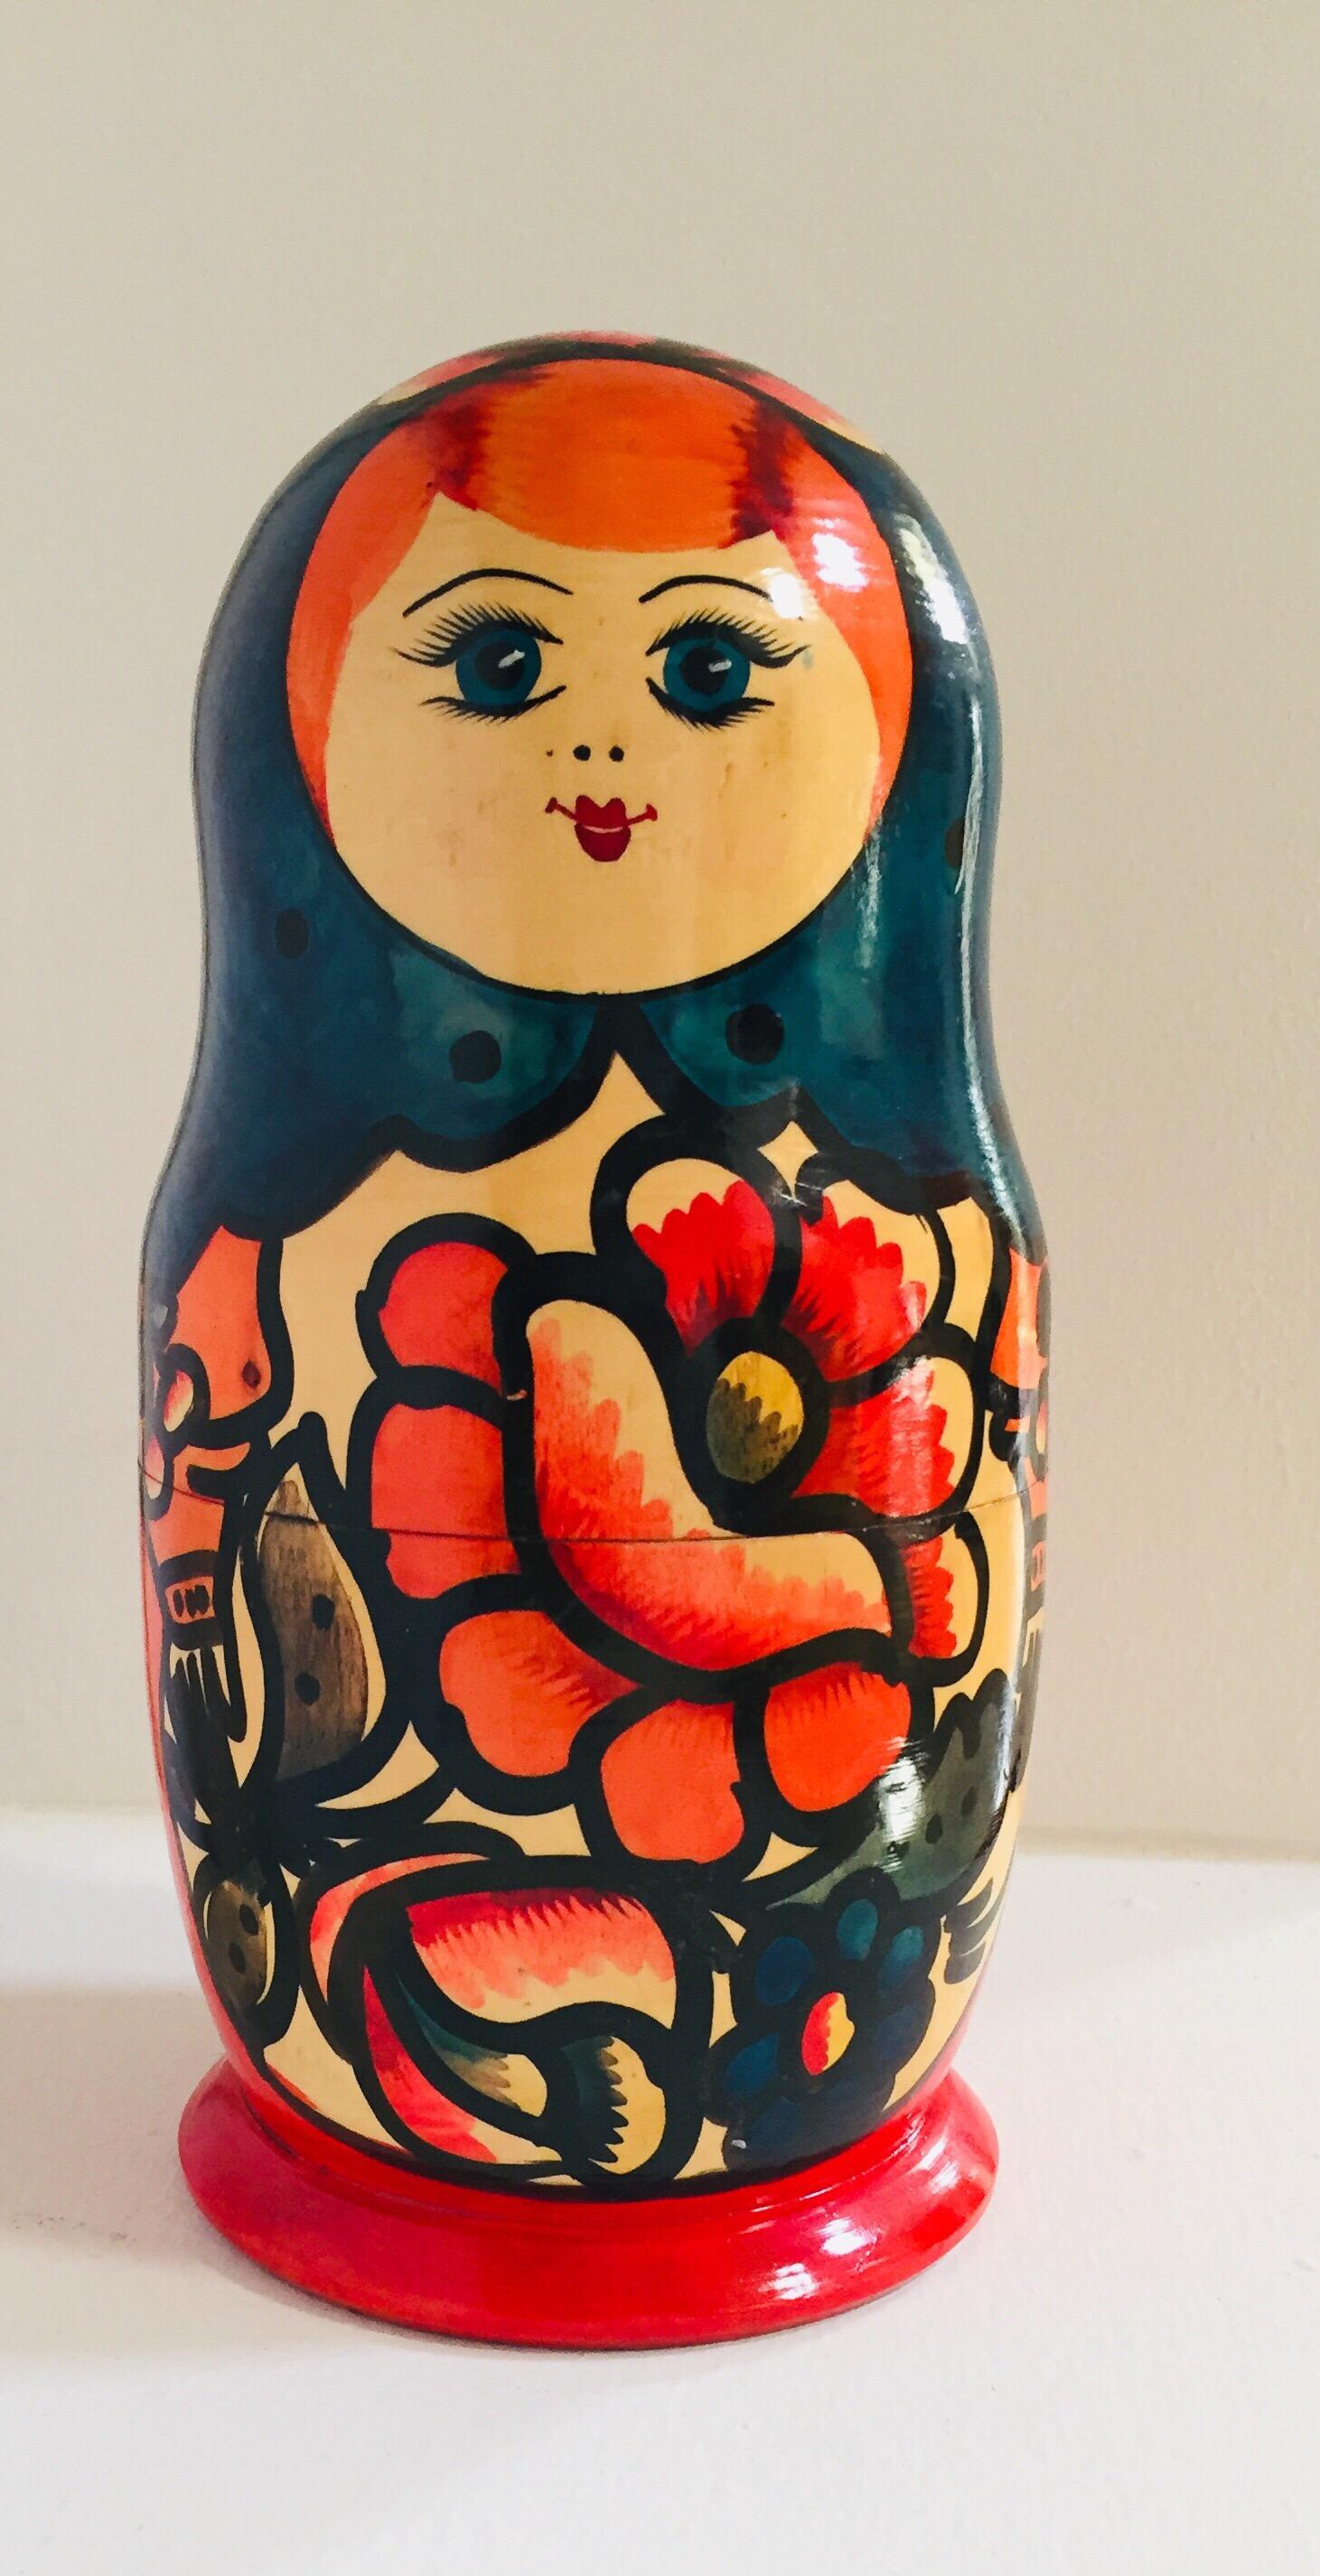 Vintage hand painted and carved Neasting dolls in traditional costume, woman wearing head scarf and traditional robe with baby girls.
Traditional hand painted beech wooden Matryoshka nesting dolls.
This Matryoshka dolls are made of beech wood with